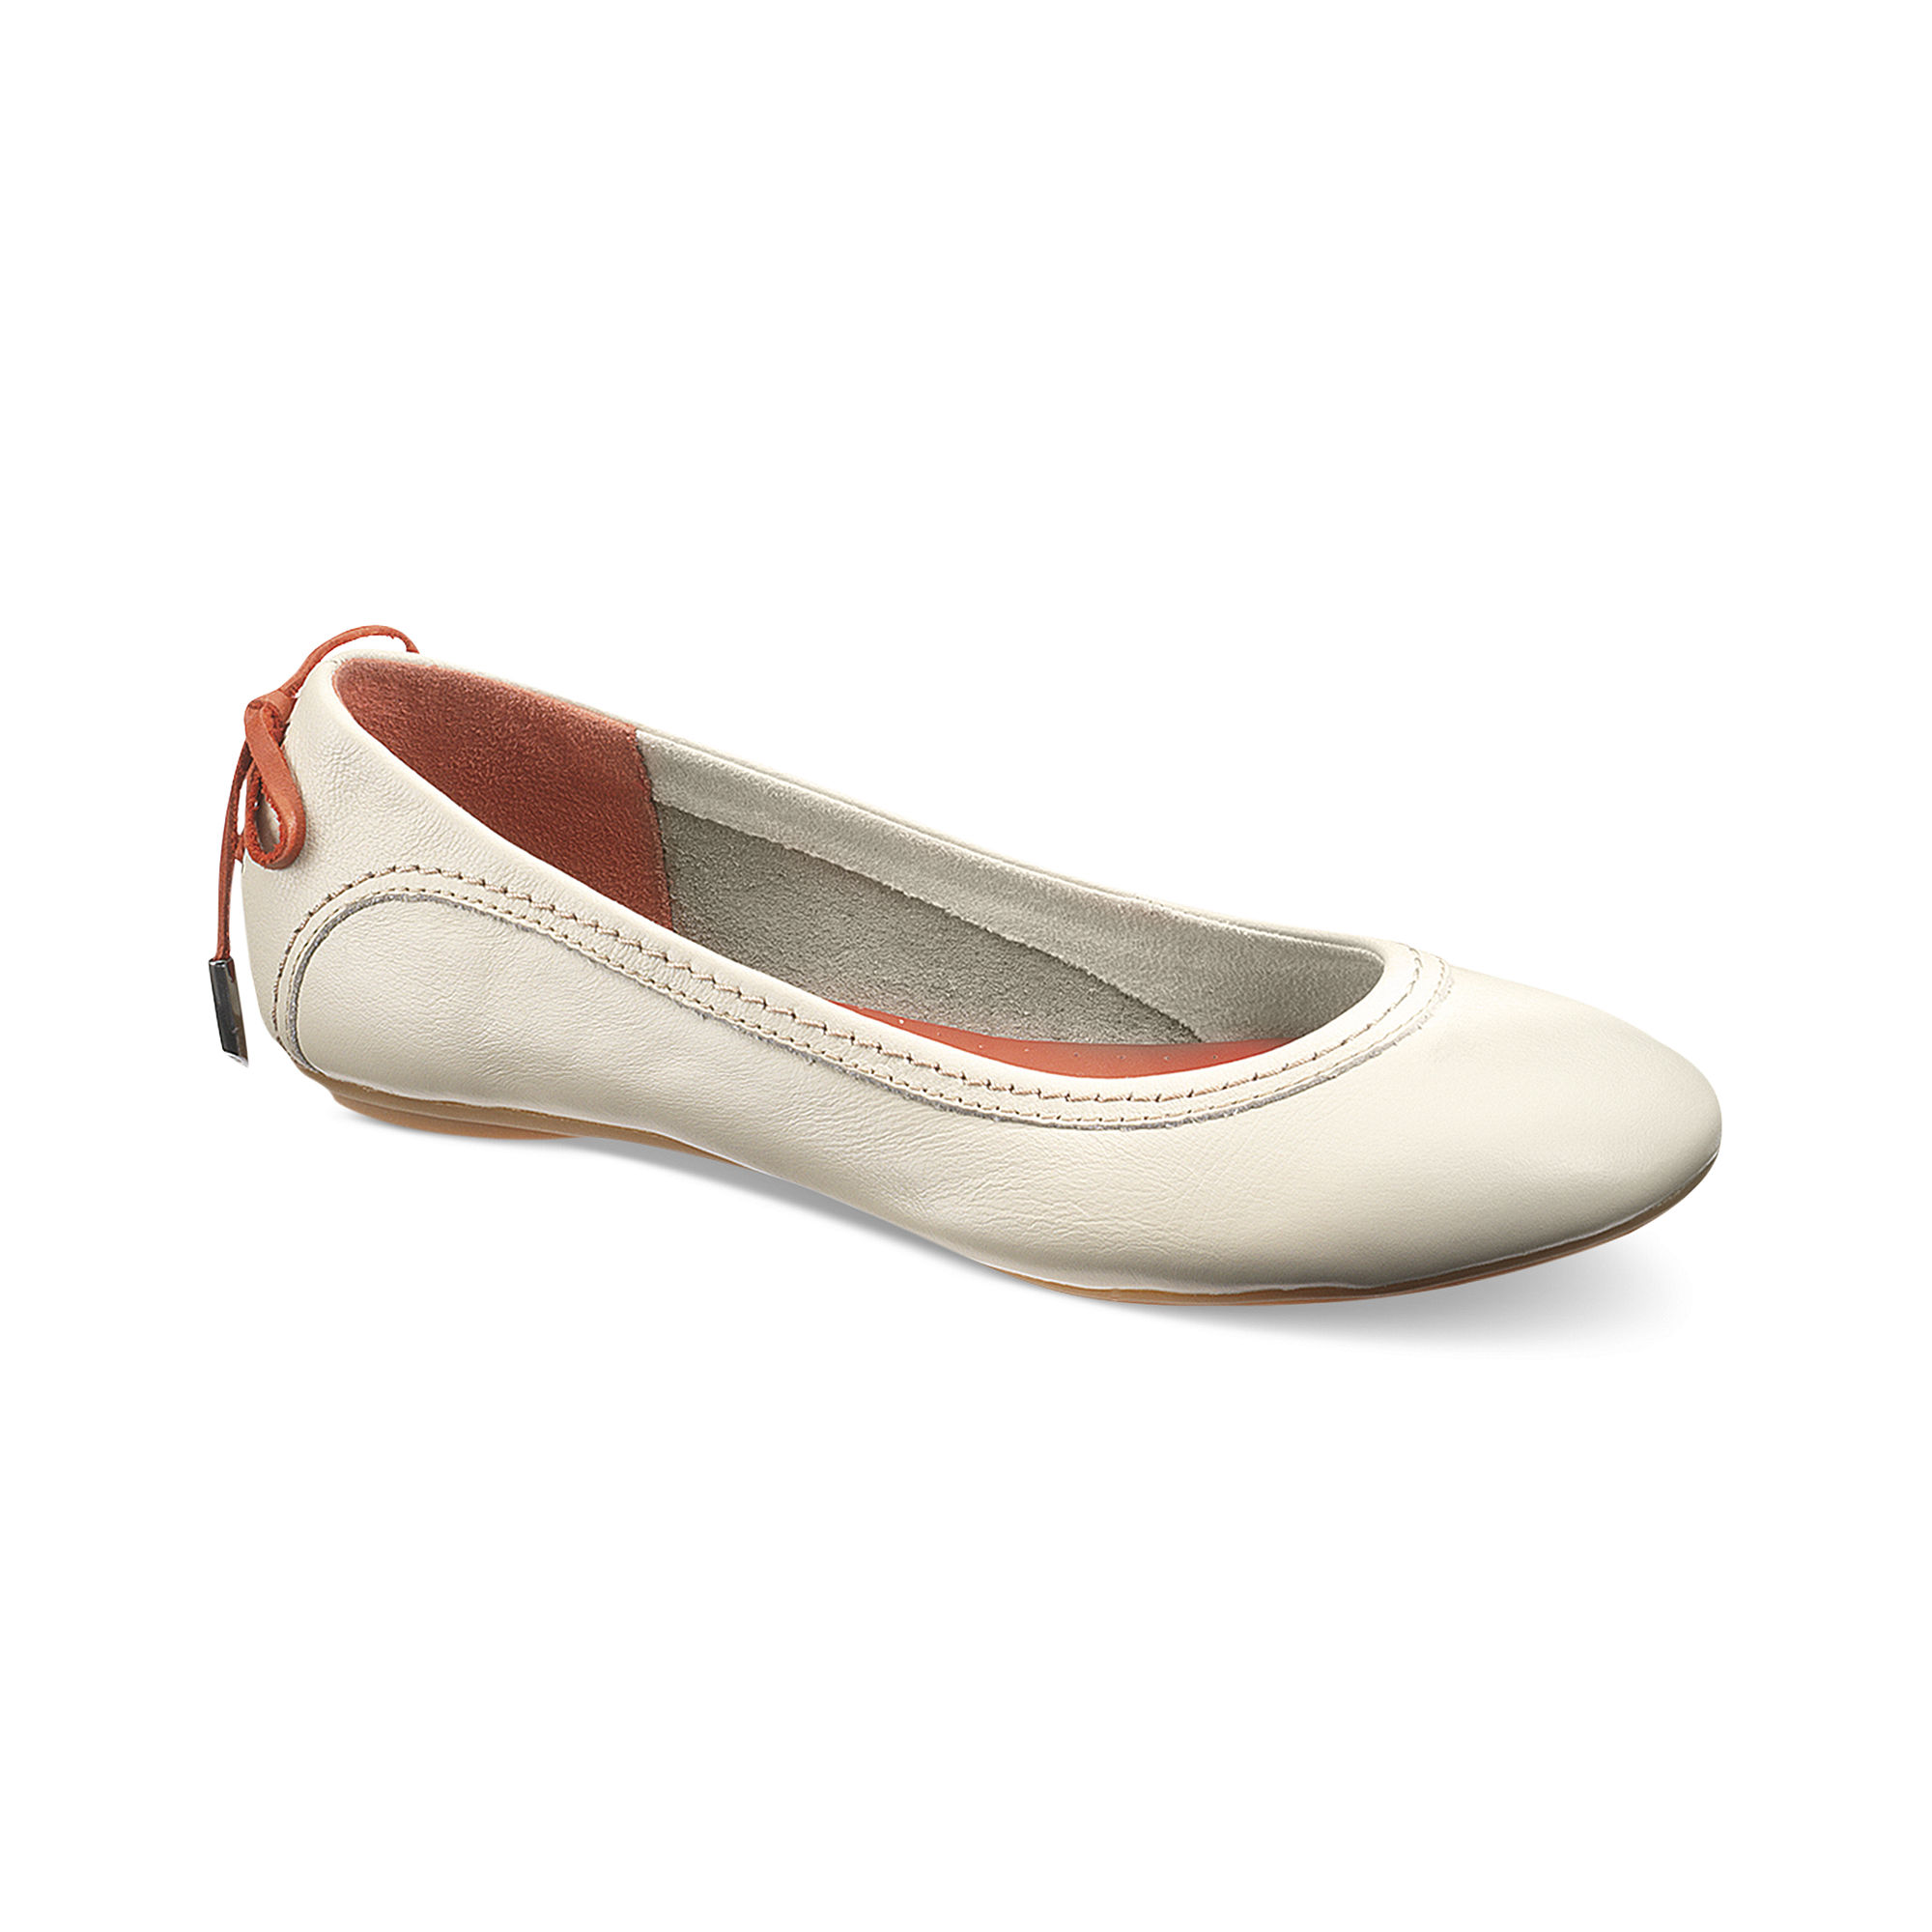 style that can't be beat. Hush puppies' chaste skimmer ballet flats ...